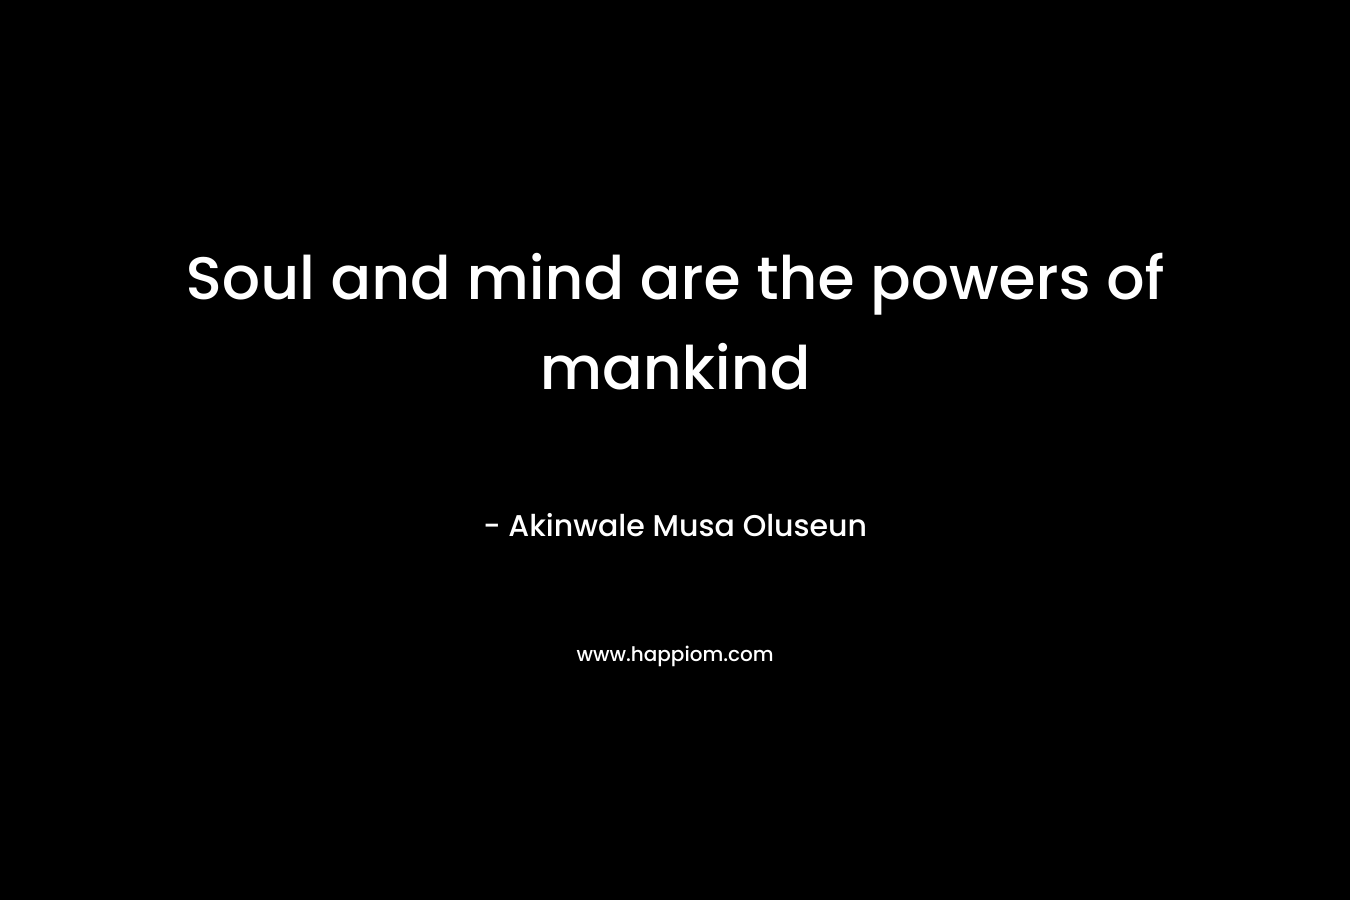 Soul and mind are the powers of mankind